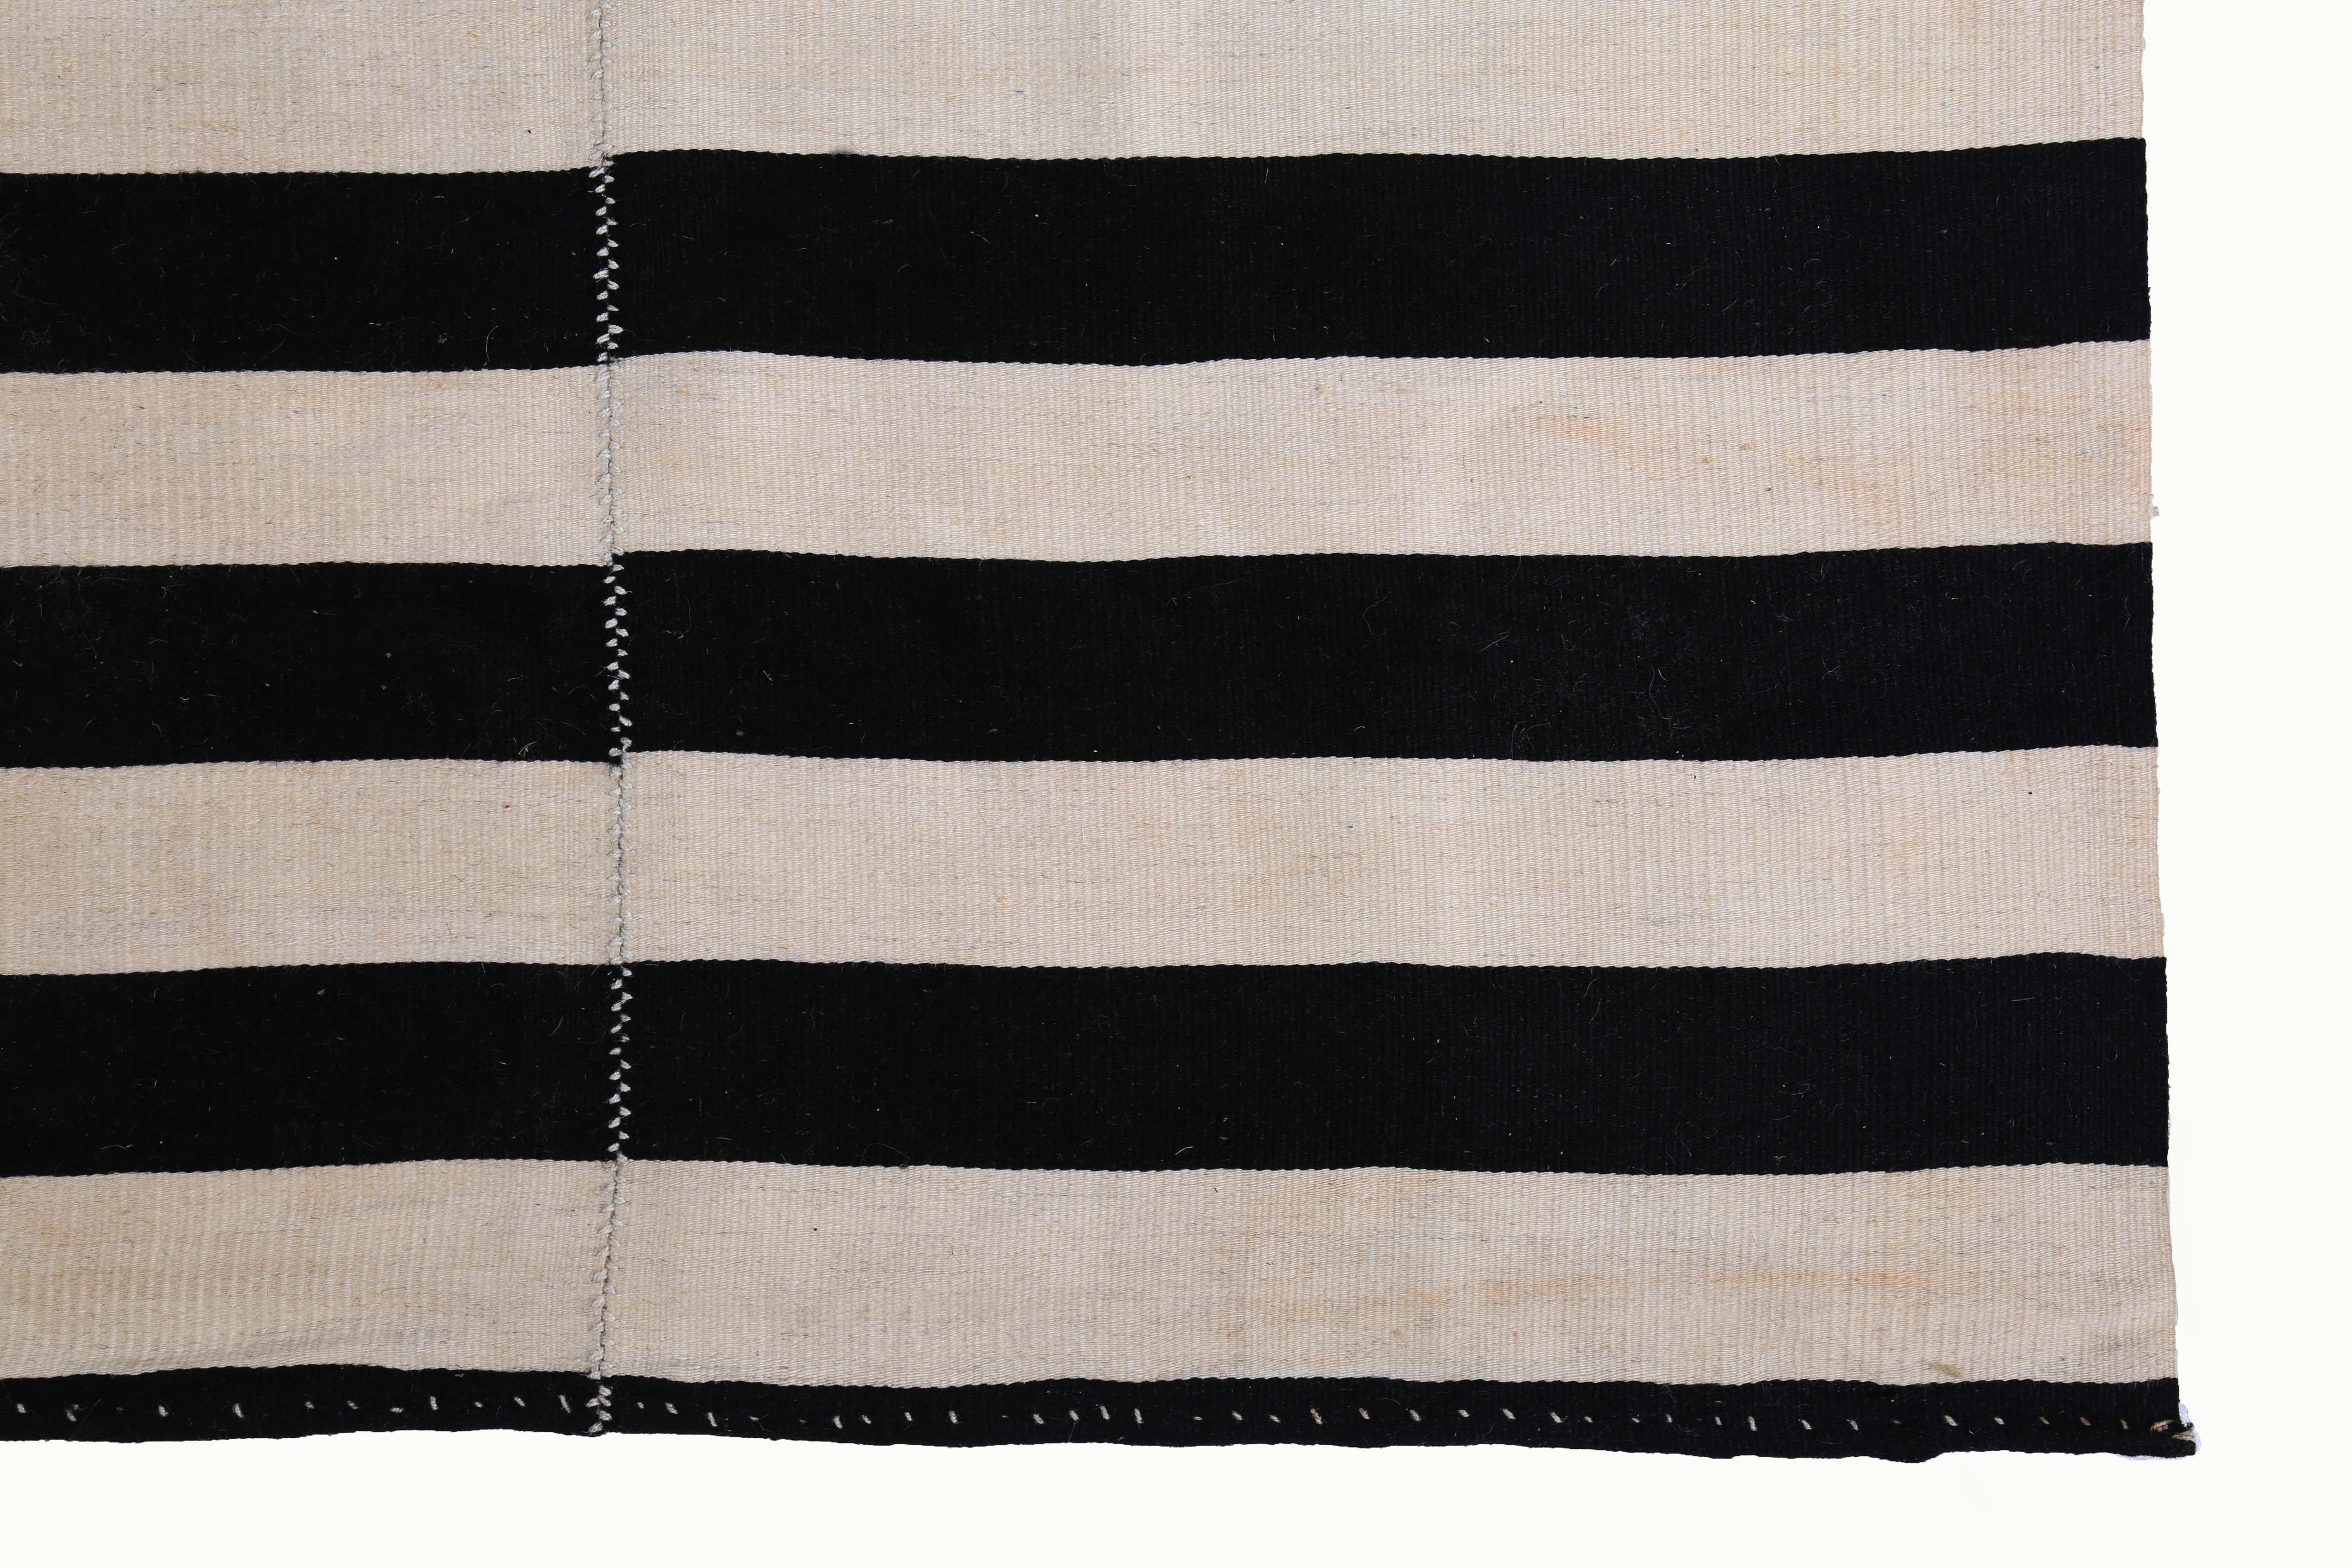 Large Turkish Kilim Rug with Black Stripes on Ivory Field In New Condition For Sale In Dallas, TX